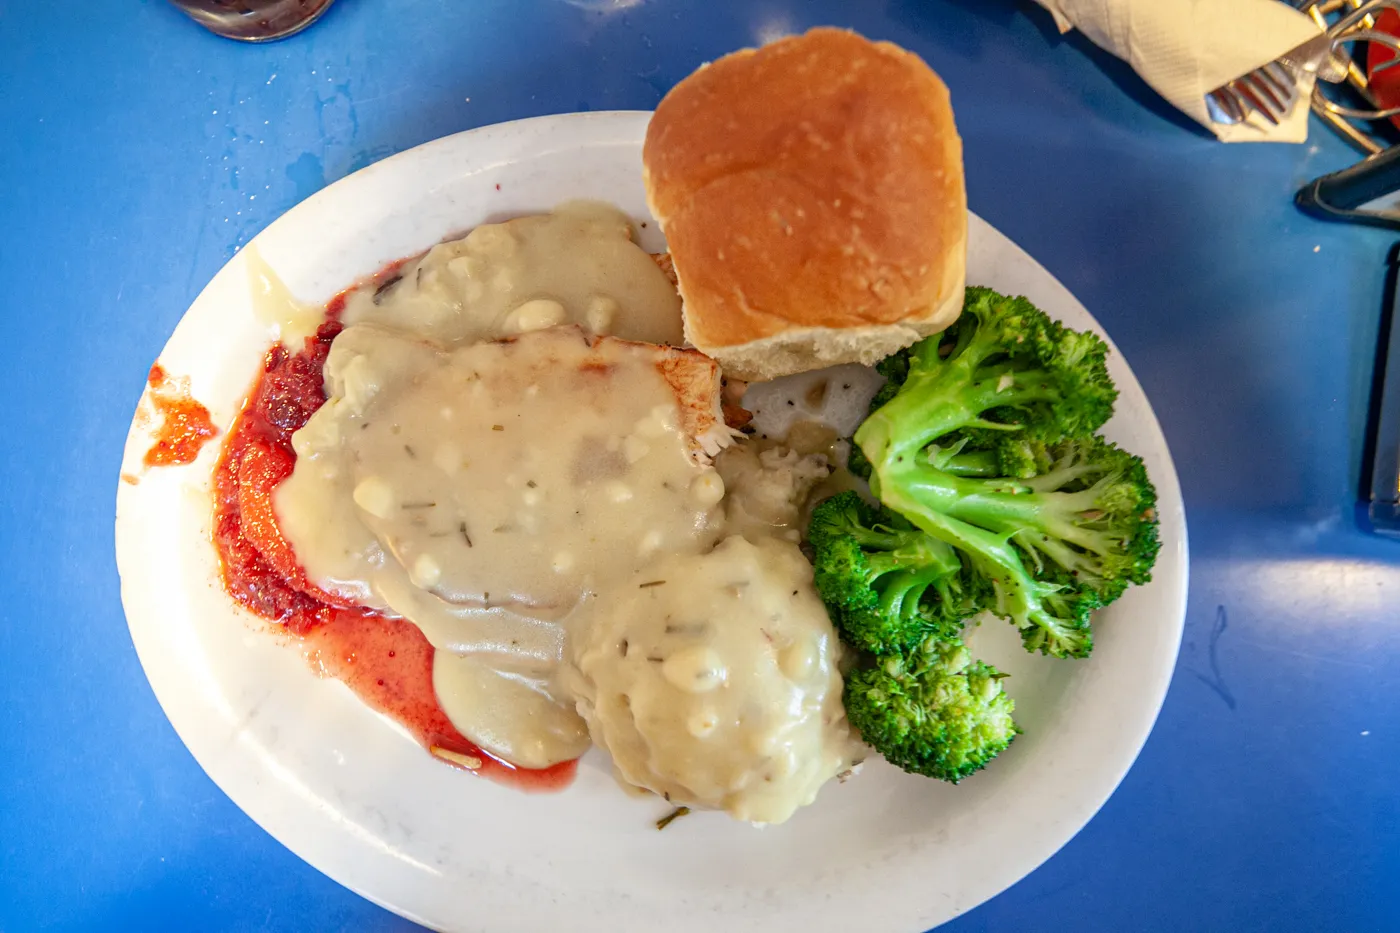 Road Trip Dinner Ideas - Thanksgiving feast dinner - turkey, mashed potatoes, and broccoli, at Monty’s Blue Plate Diner in Madison, WIsconsin.